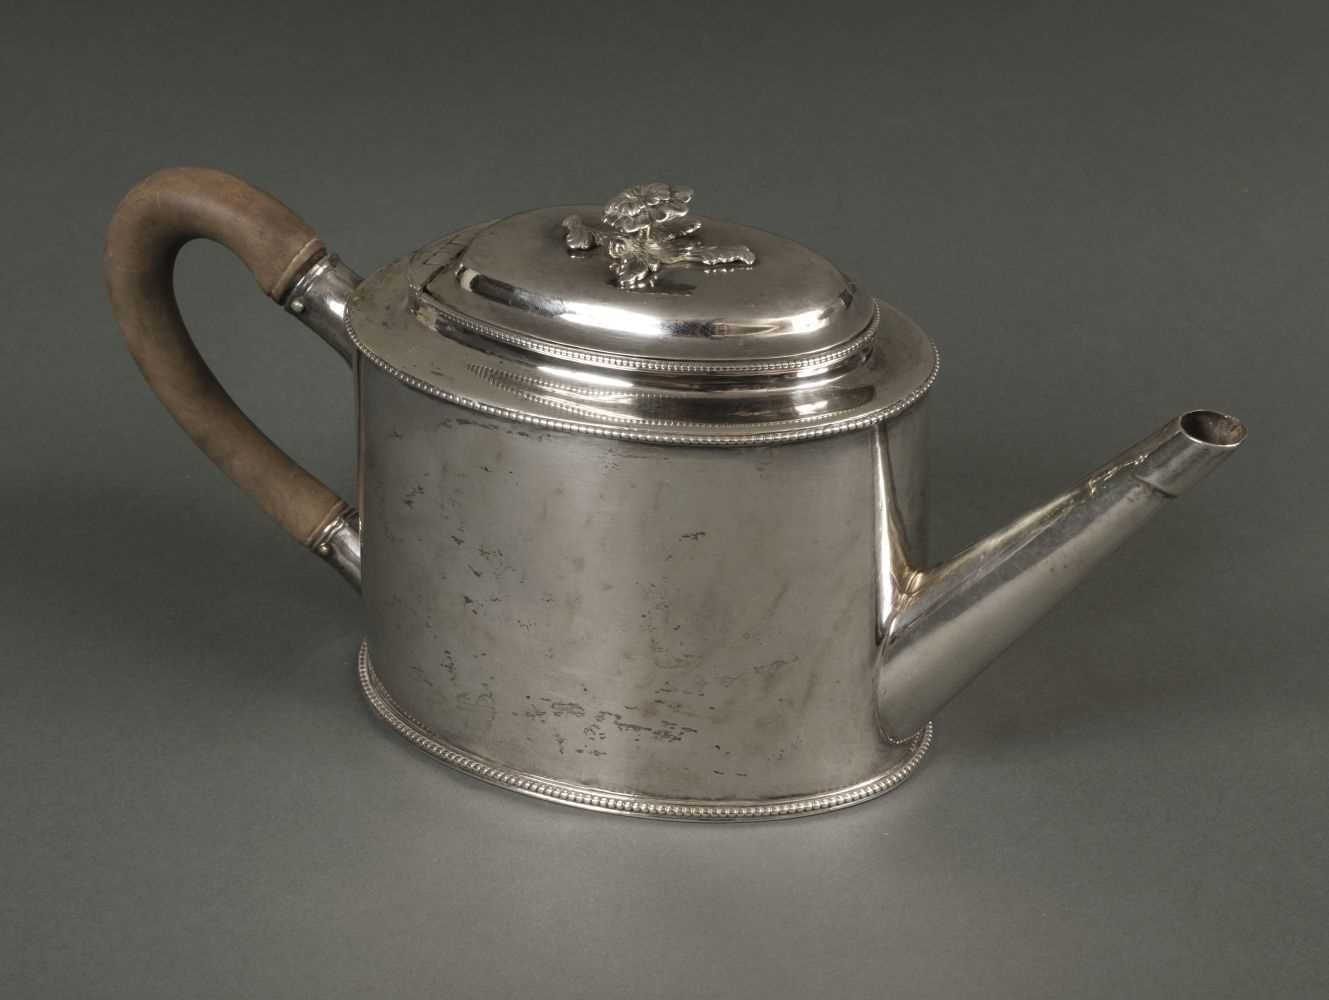 Lot 219 - Teapot. A George III silver teapot by William Turton, London 1783